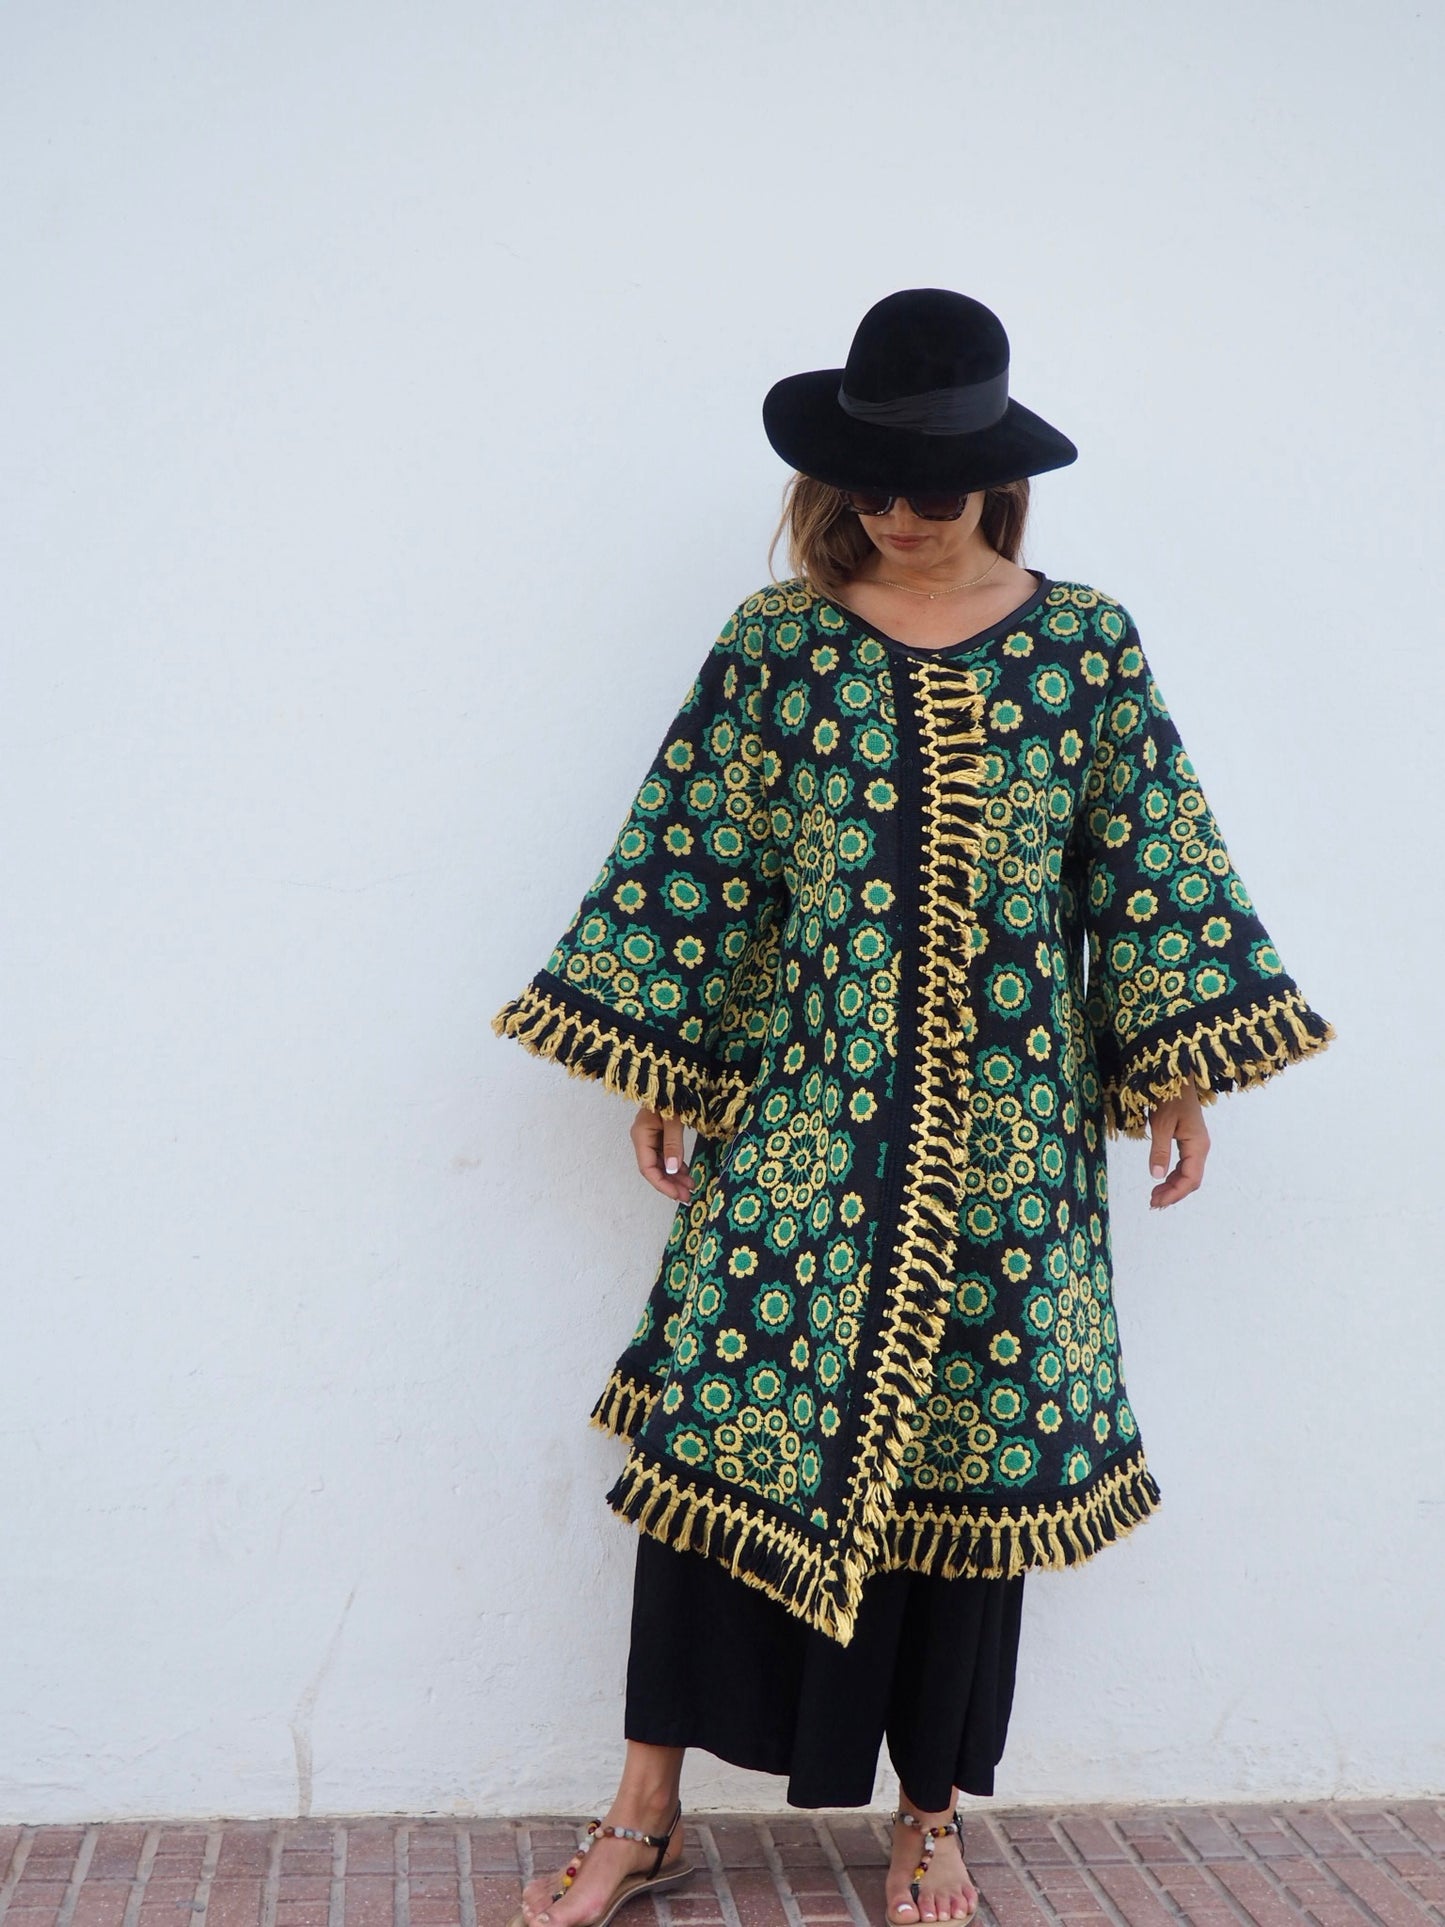 Stunning vintage 1970’s black and green tapestry jacket cut on the bias with bell sleeves made by Vagabond Ibiza